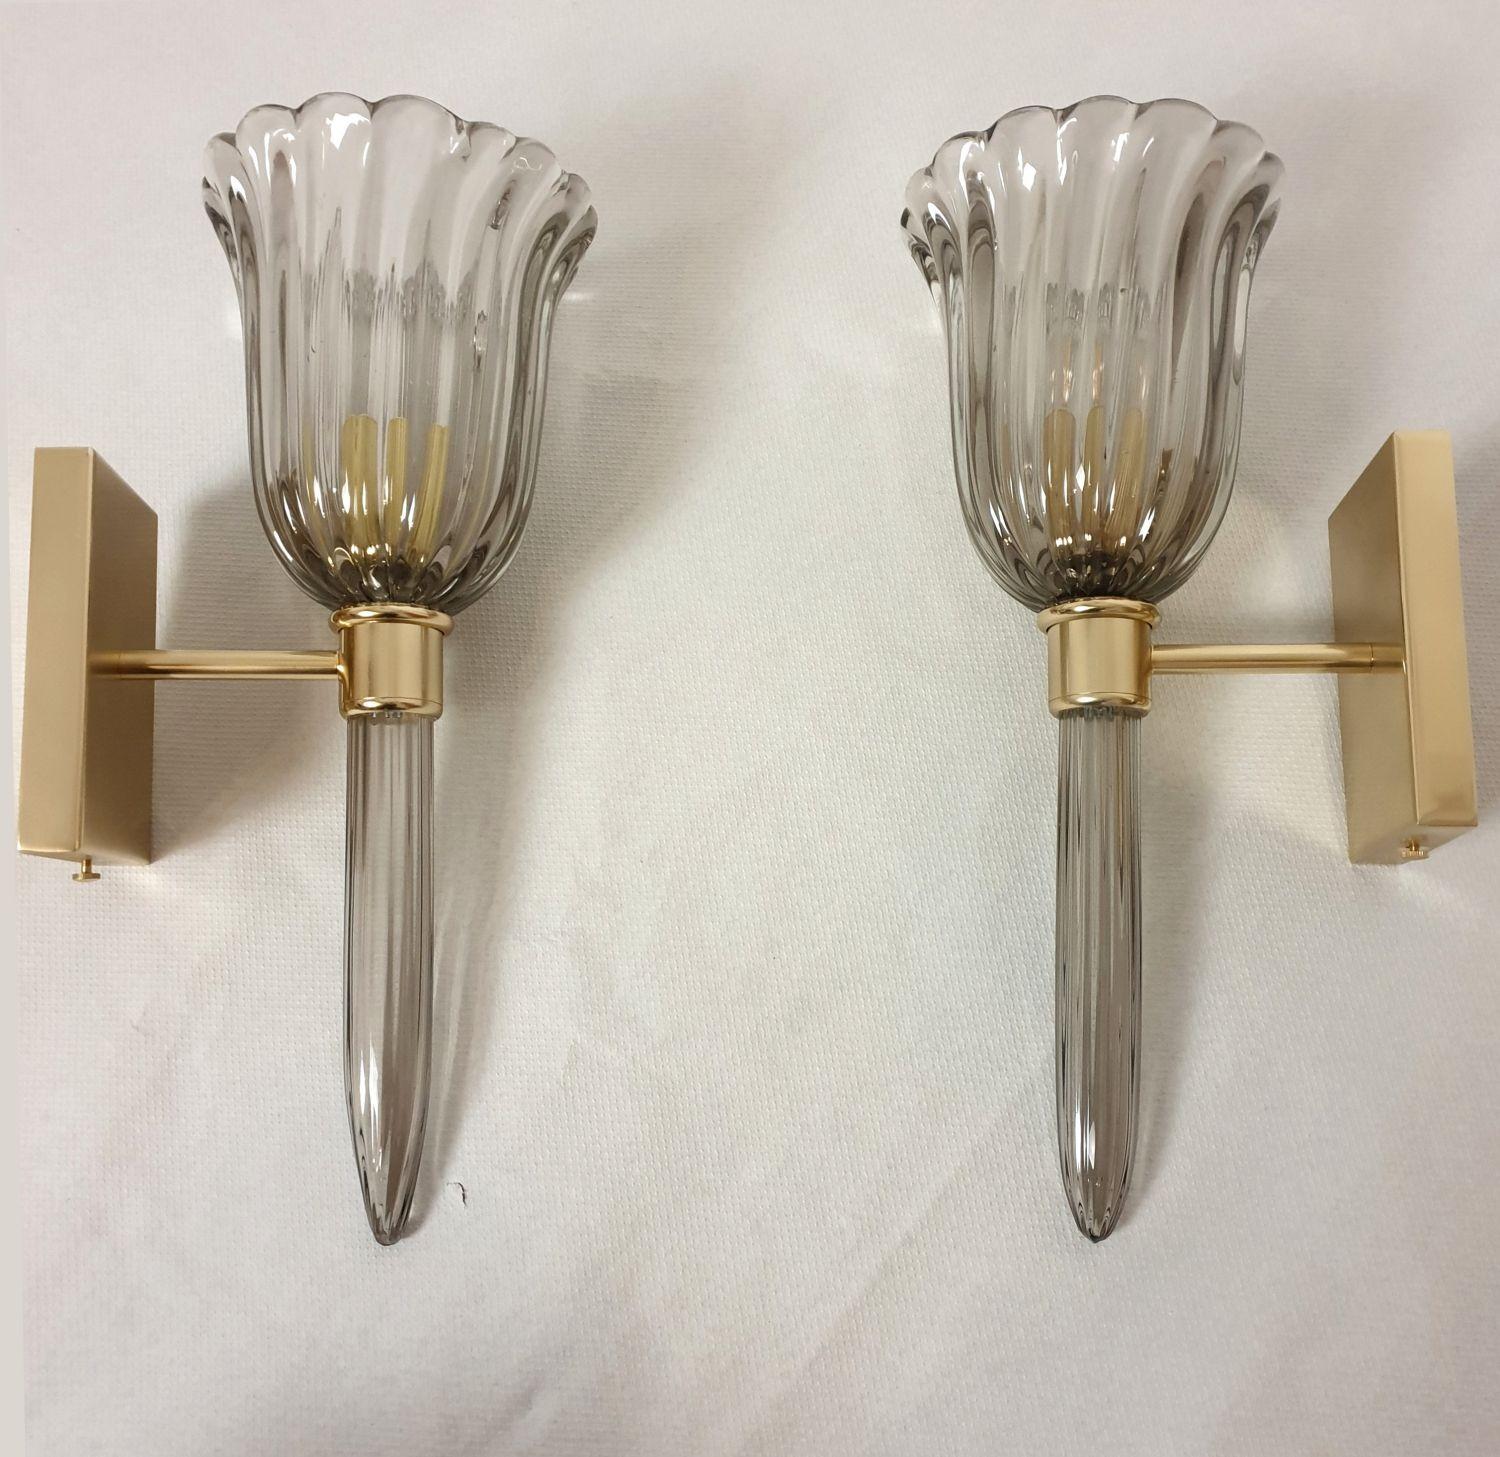 Pair of Neoclassical Handmade Murano glass sconces, attributed to Venini, Italy 1980s.
The Murano glass is in a light Gray or Taupe color - it's thickness makes it translucent.
The mounts are gold plated.
The back plate is: H 5.9 x W 3.54 in.
The